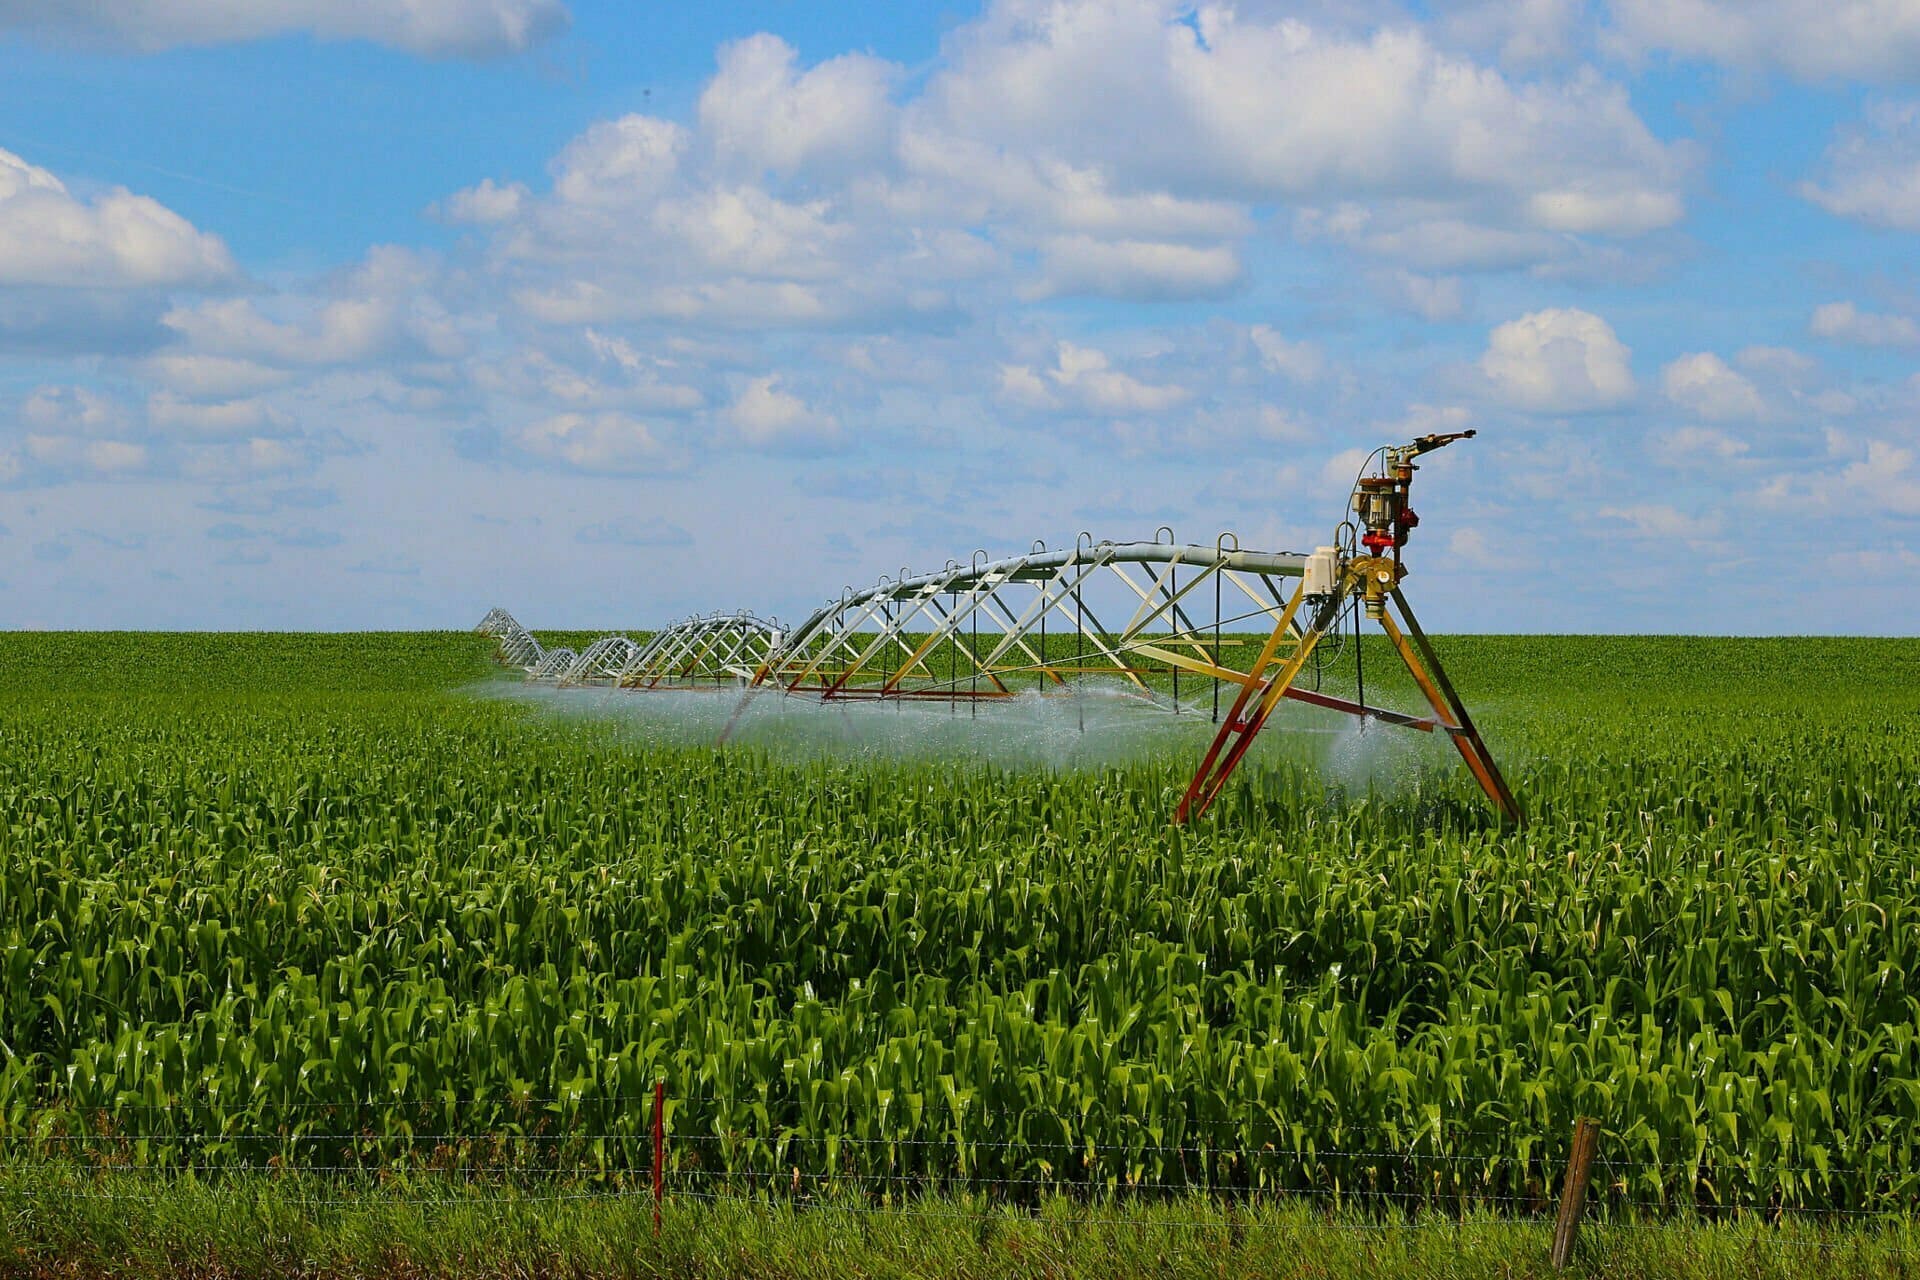 An irrigation system waters a cornfield during the summer.